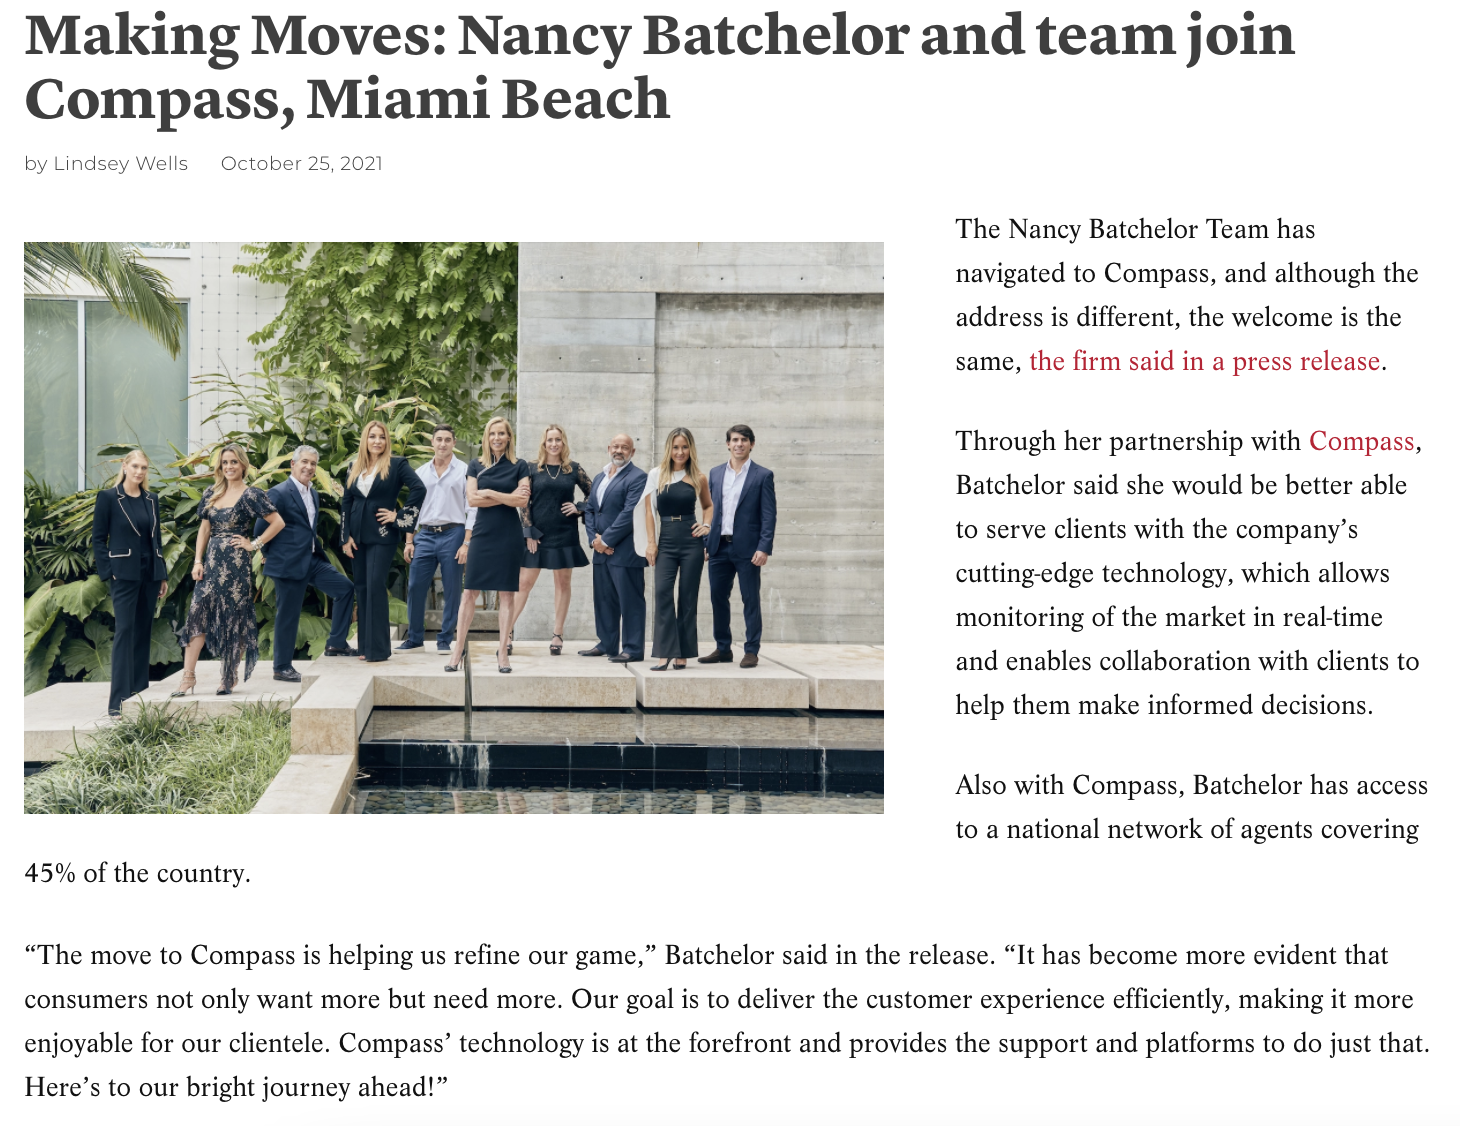 Making Moves: Nancy Batchelor and team join Compass, Miami Beach